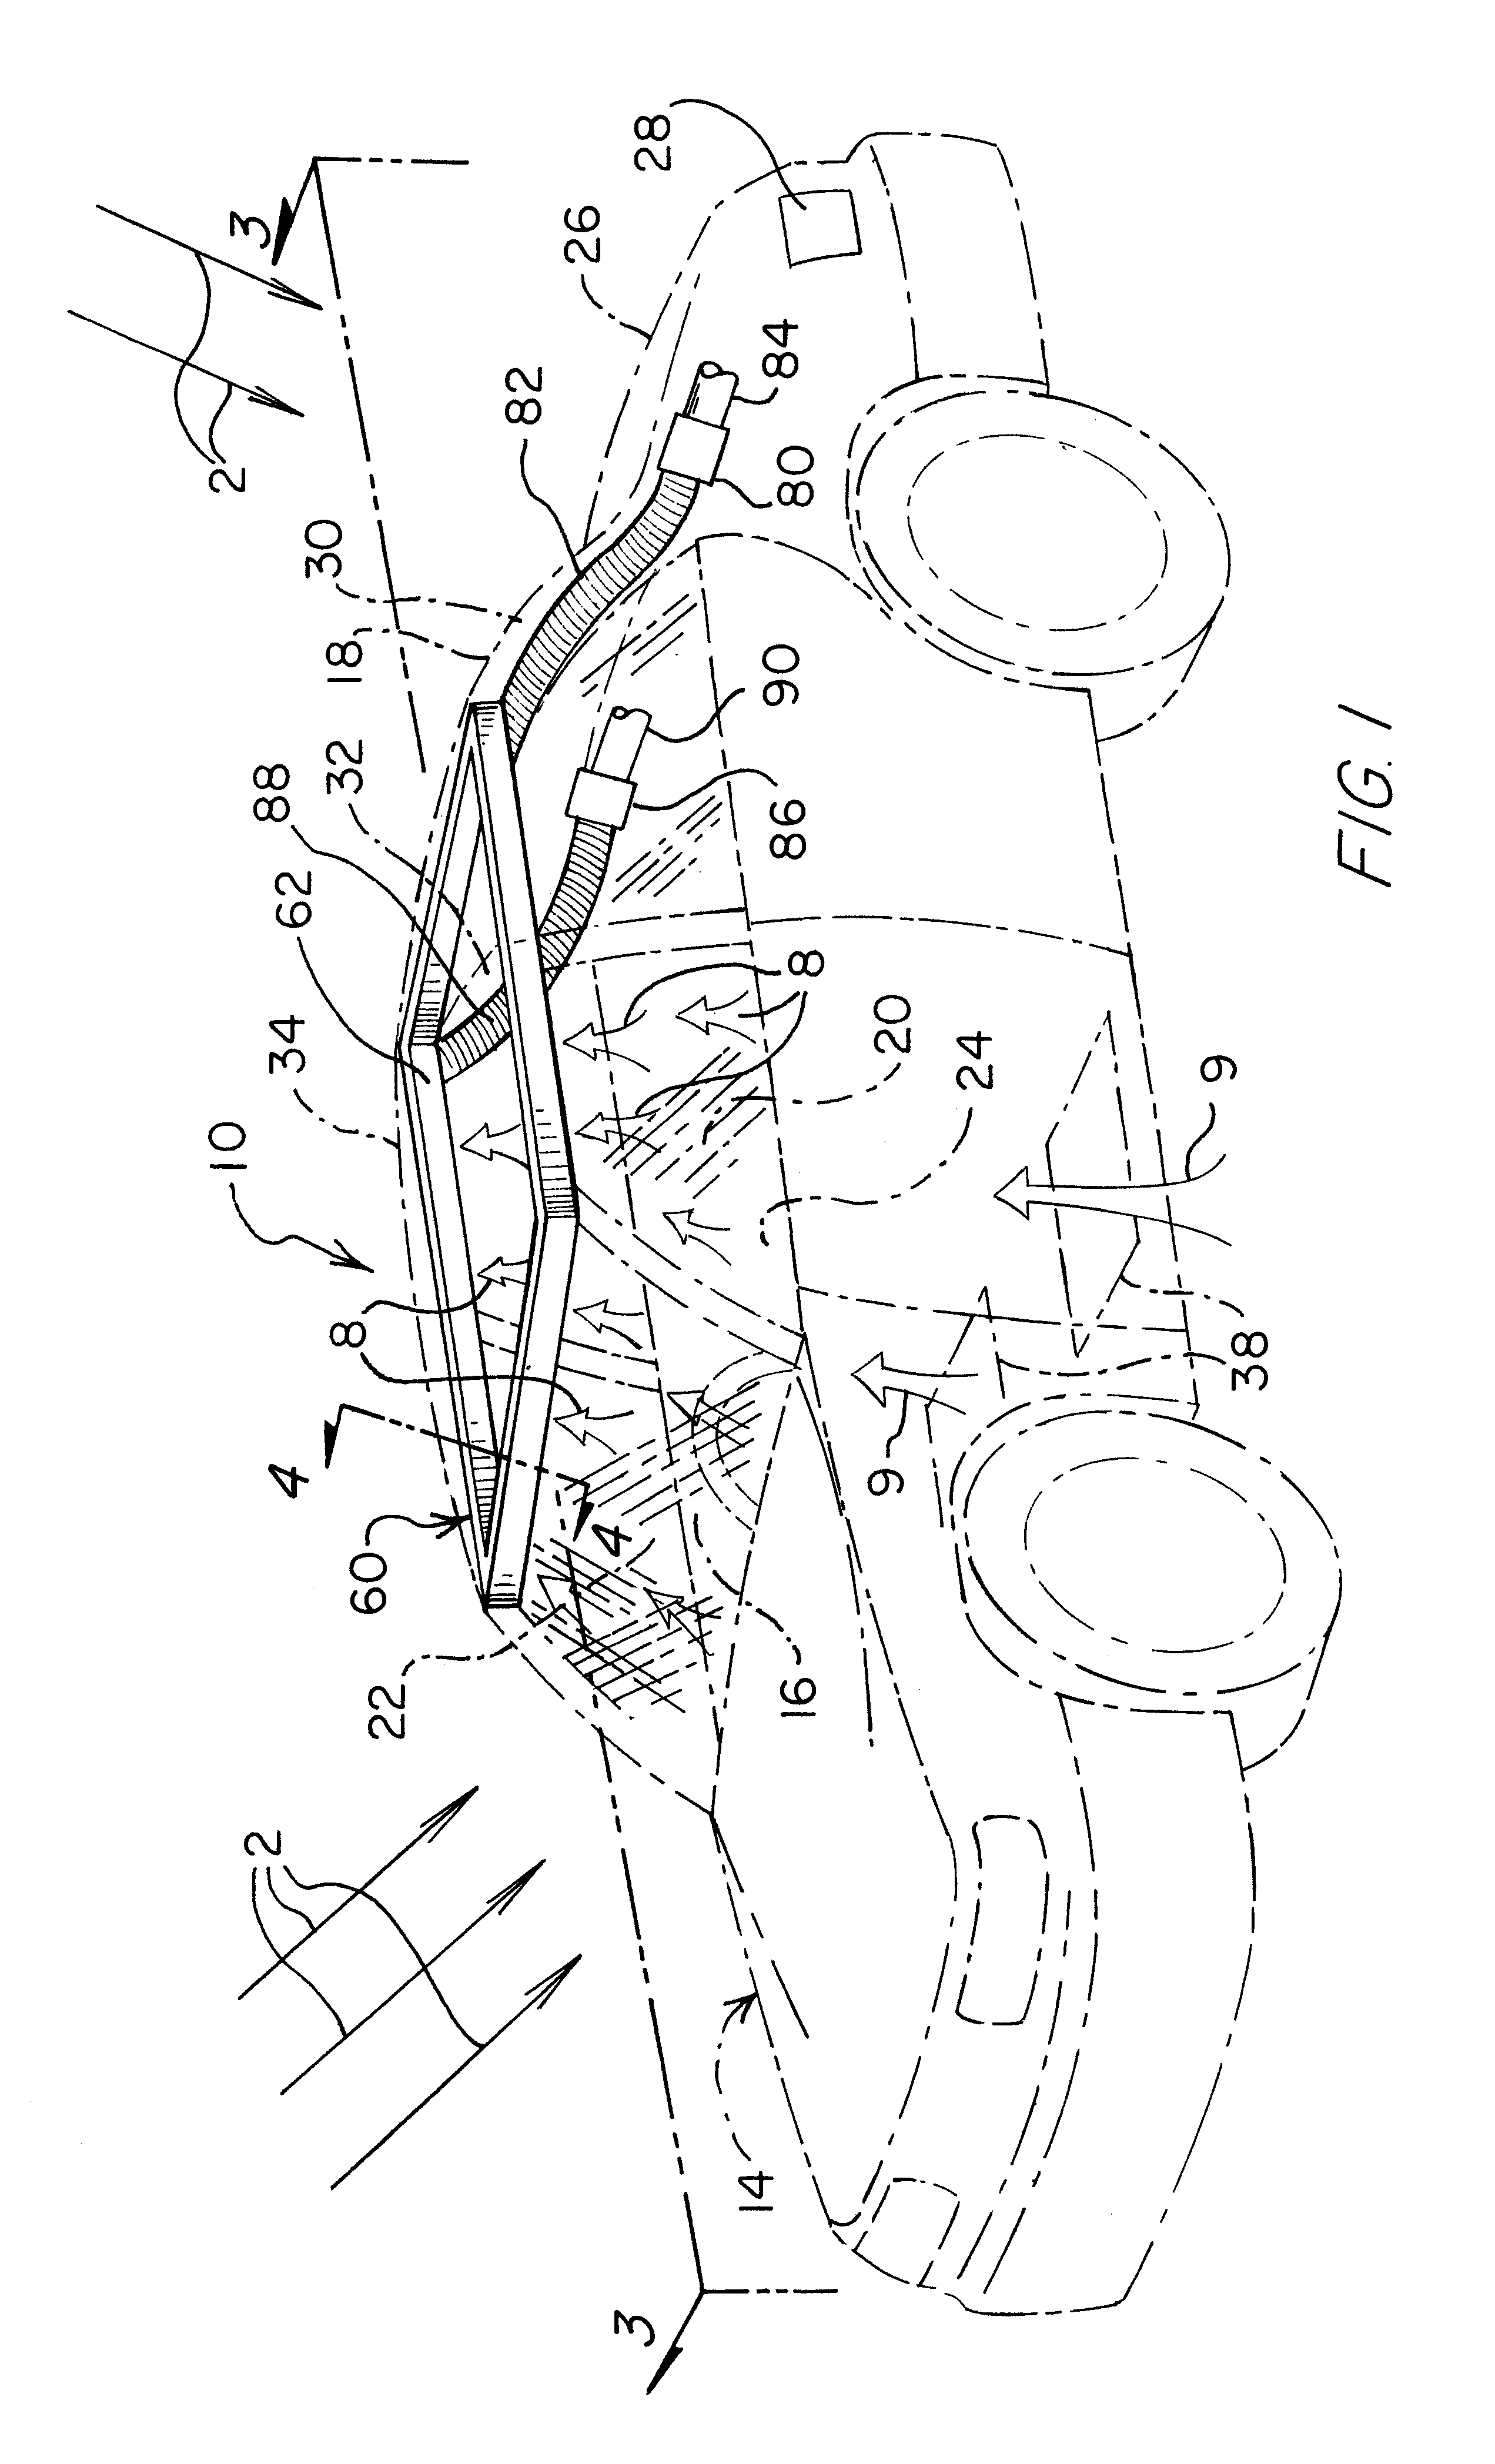 Vehicle cabin cooling system for capturing and exhausting heated boundary layer air from inner surfaces of solar heated windows